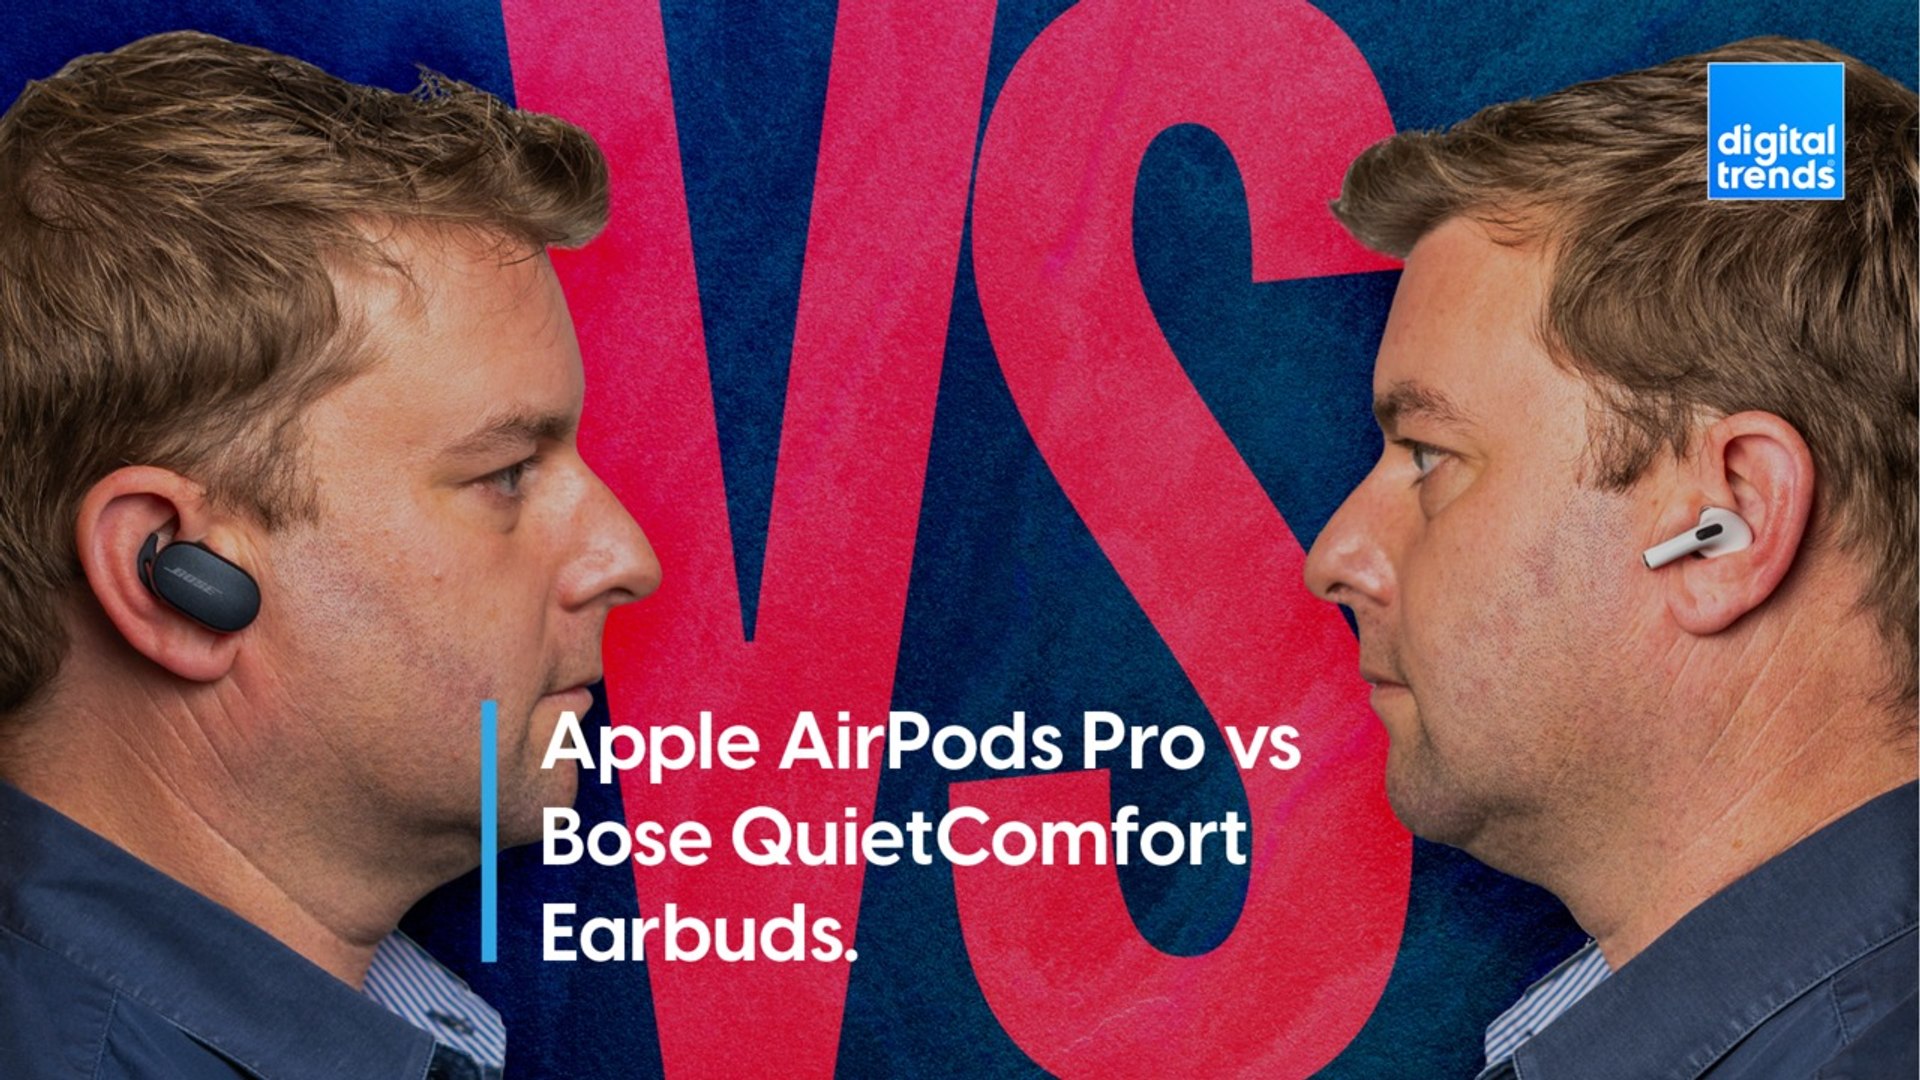 Apple AirPods Pro vs Bose QuietComfort Earbuds - video Dailymotion